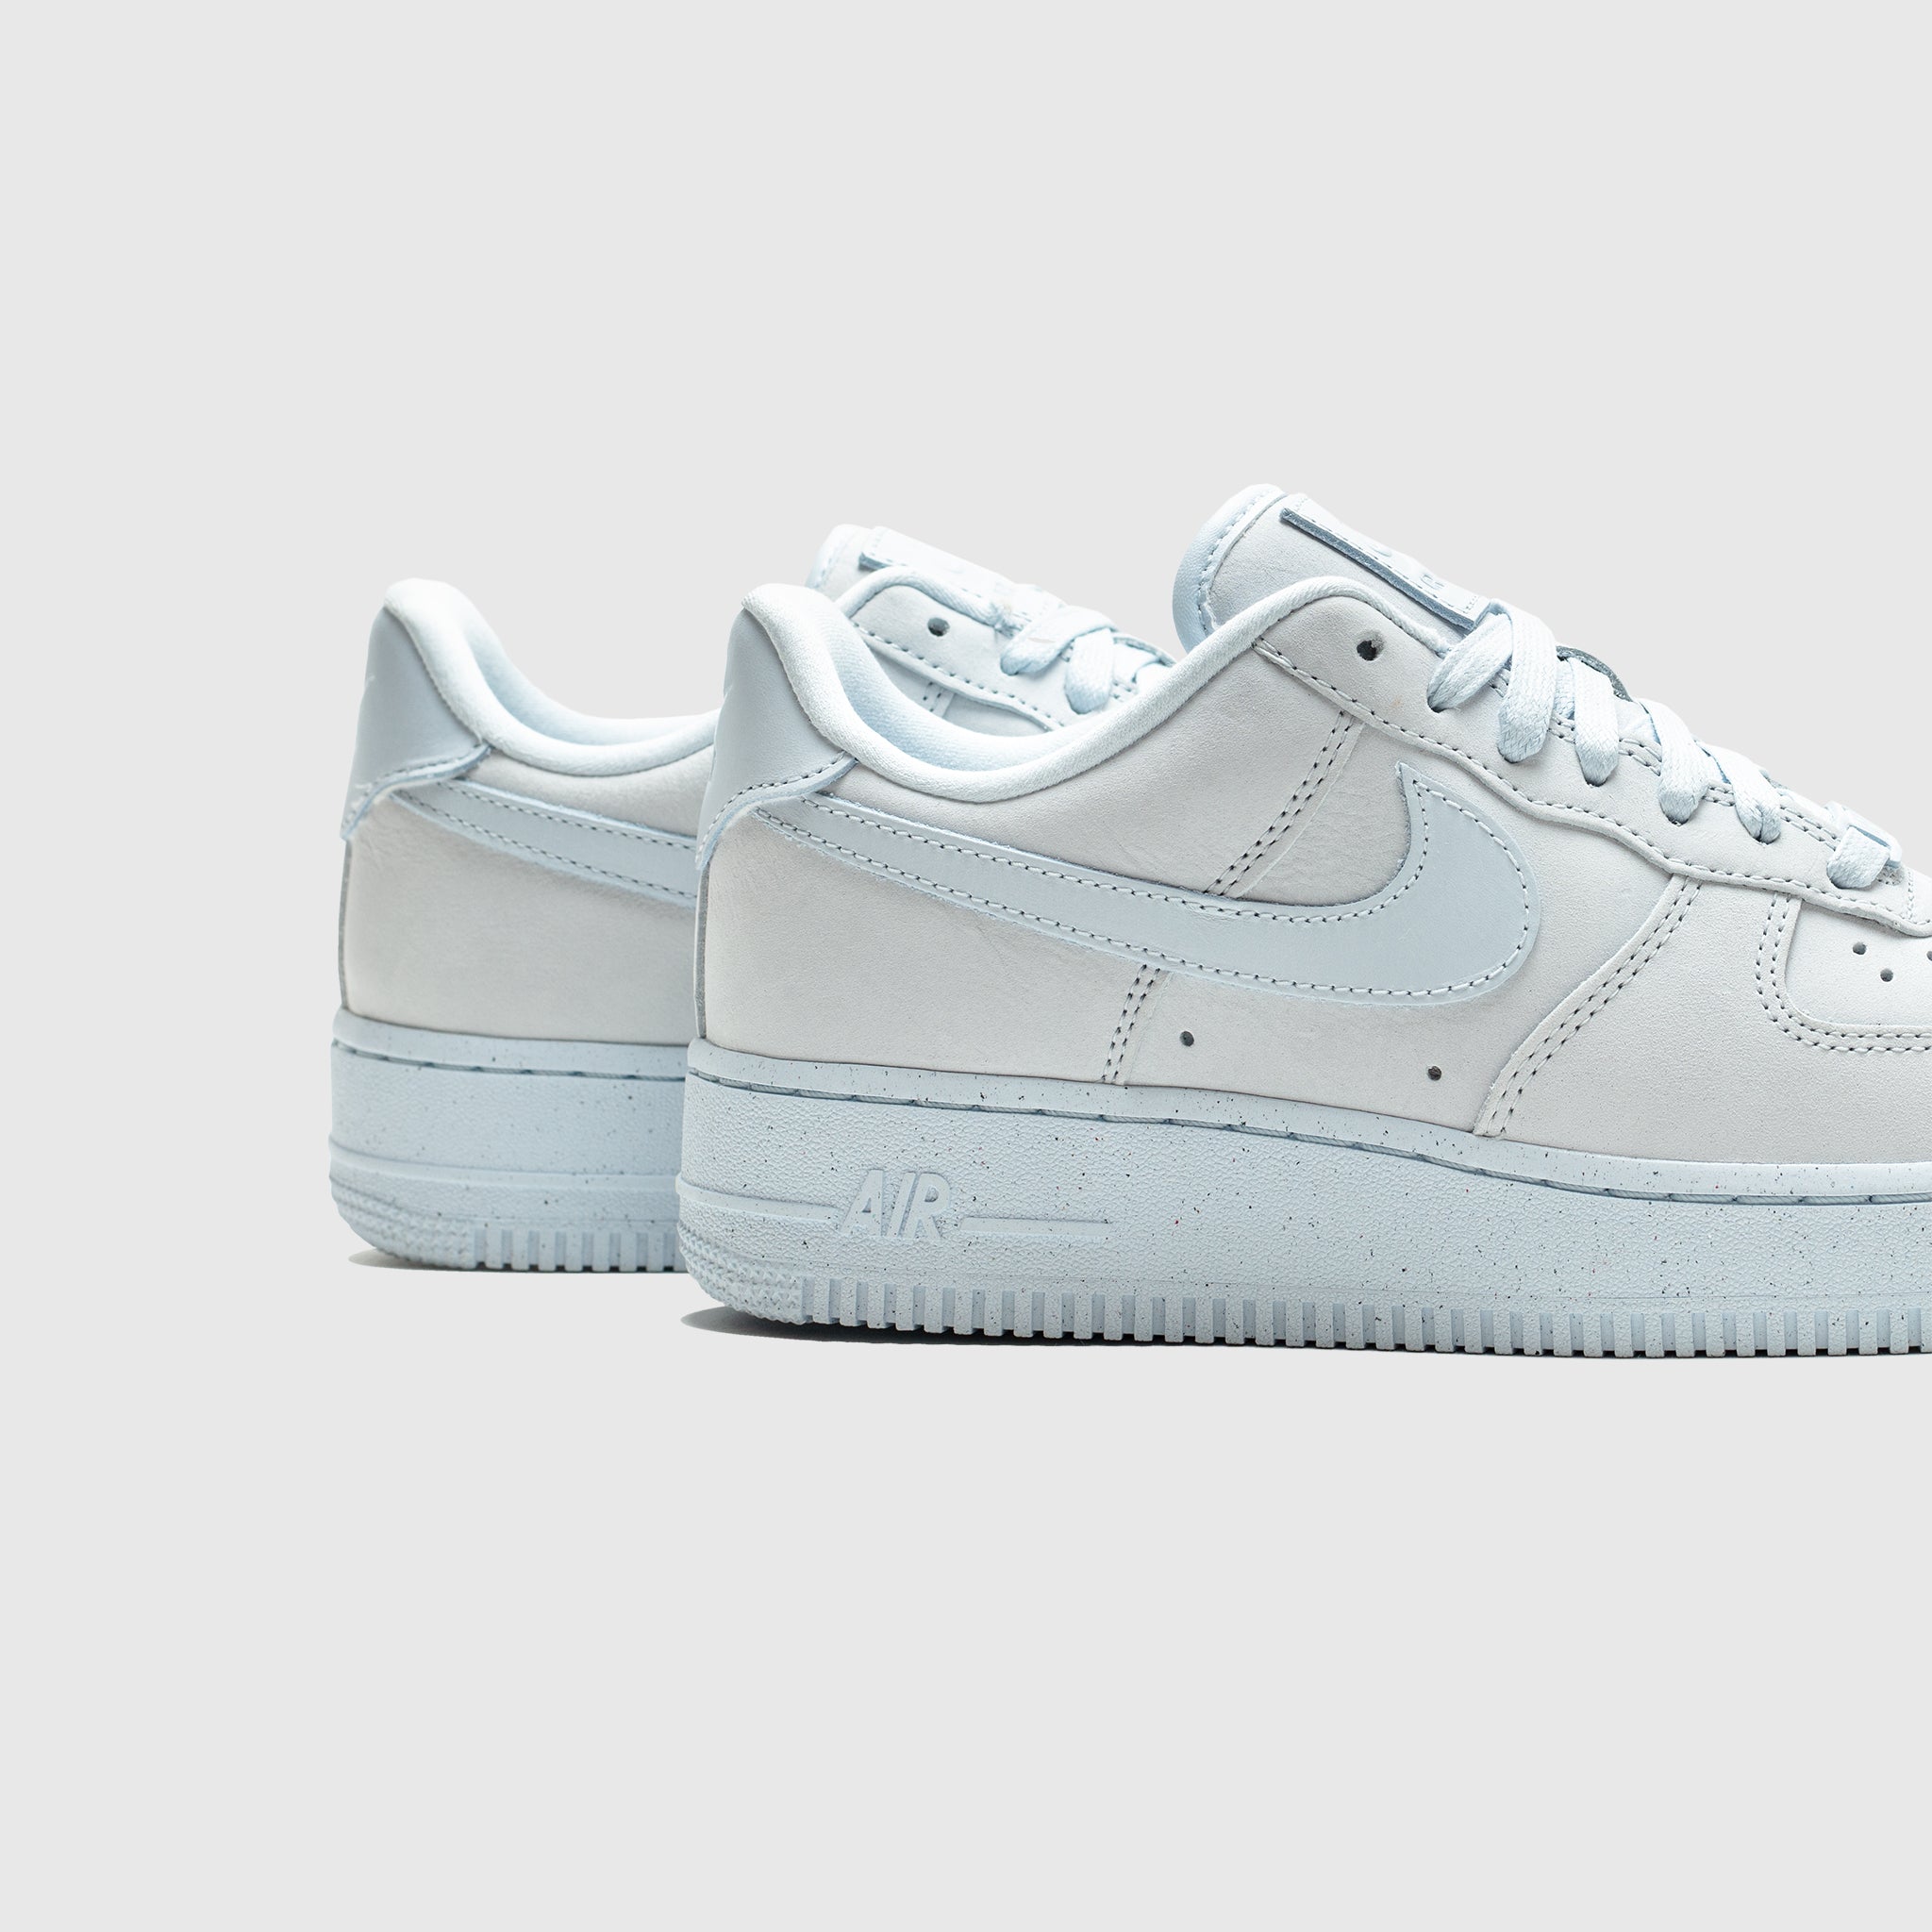 Nike Air Force 1 '07 PRM Trainers Blue Tint, 5